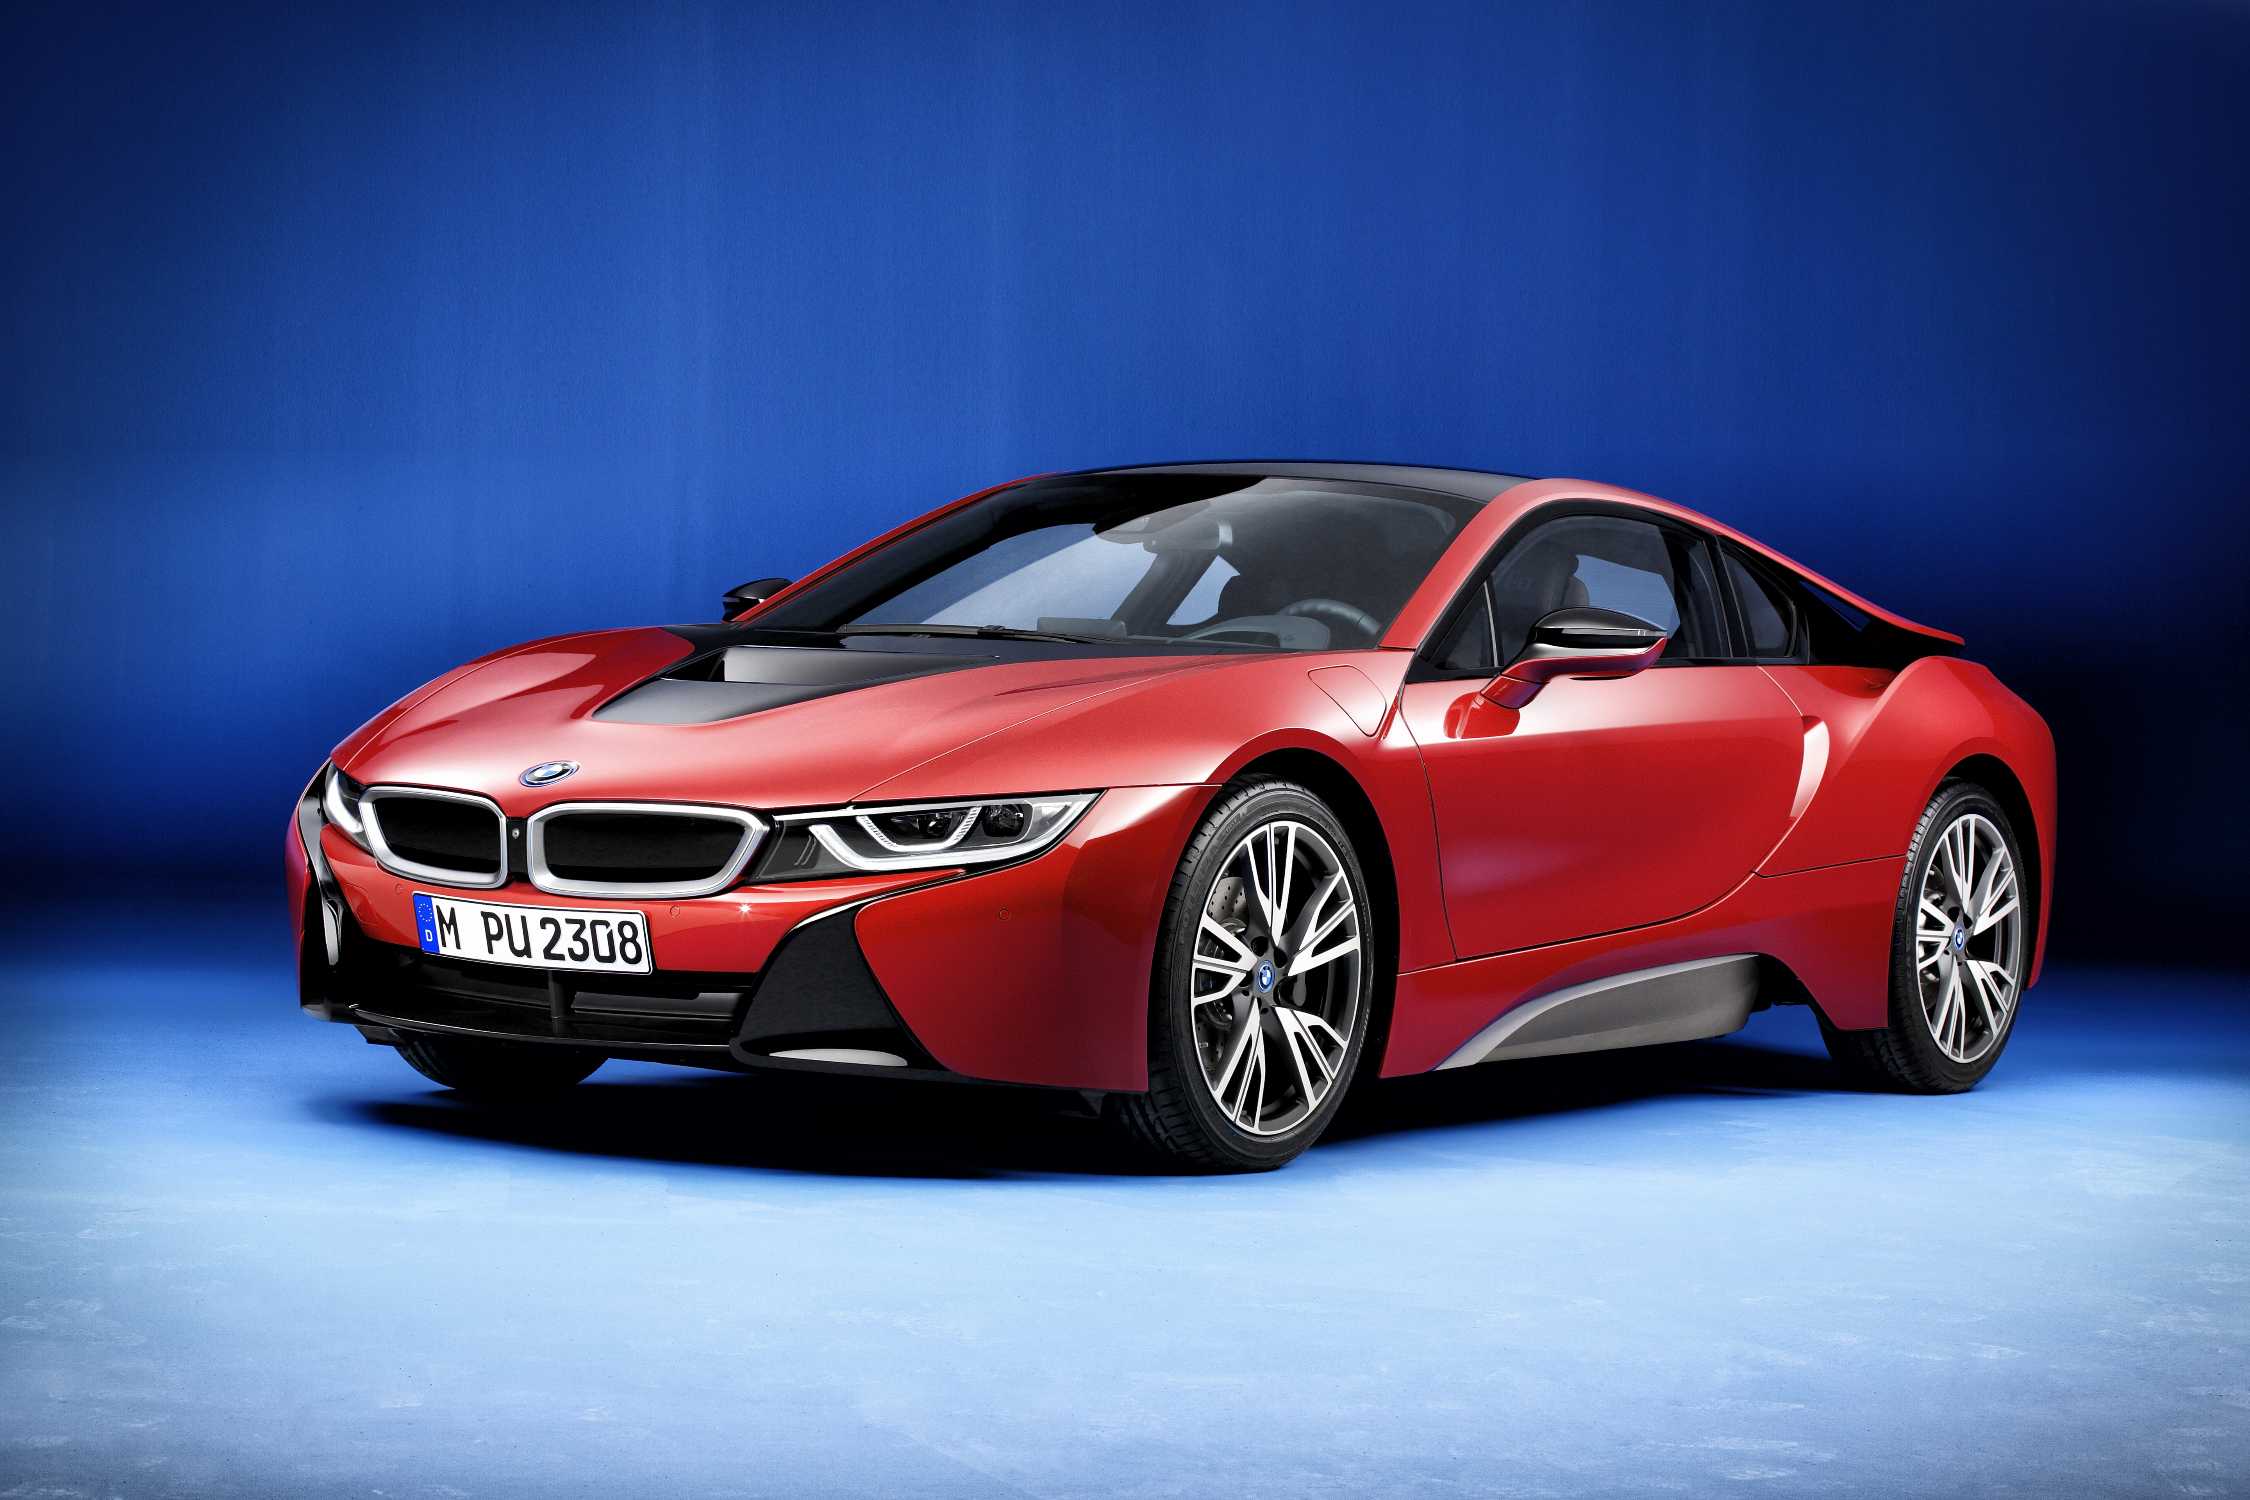 The 2016 BMW i8 Lime Green Sports car. This would be a pretty good